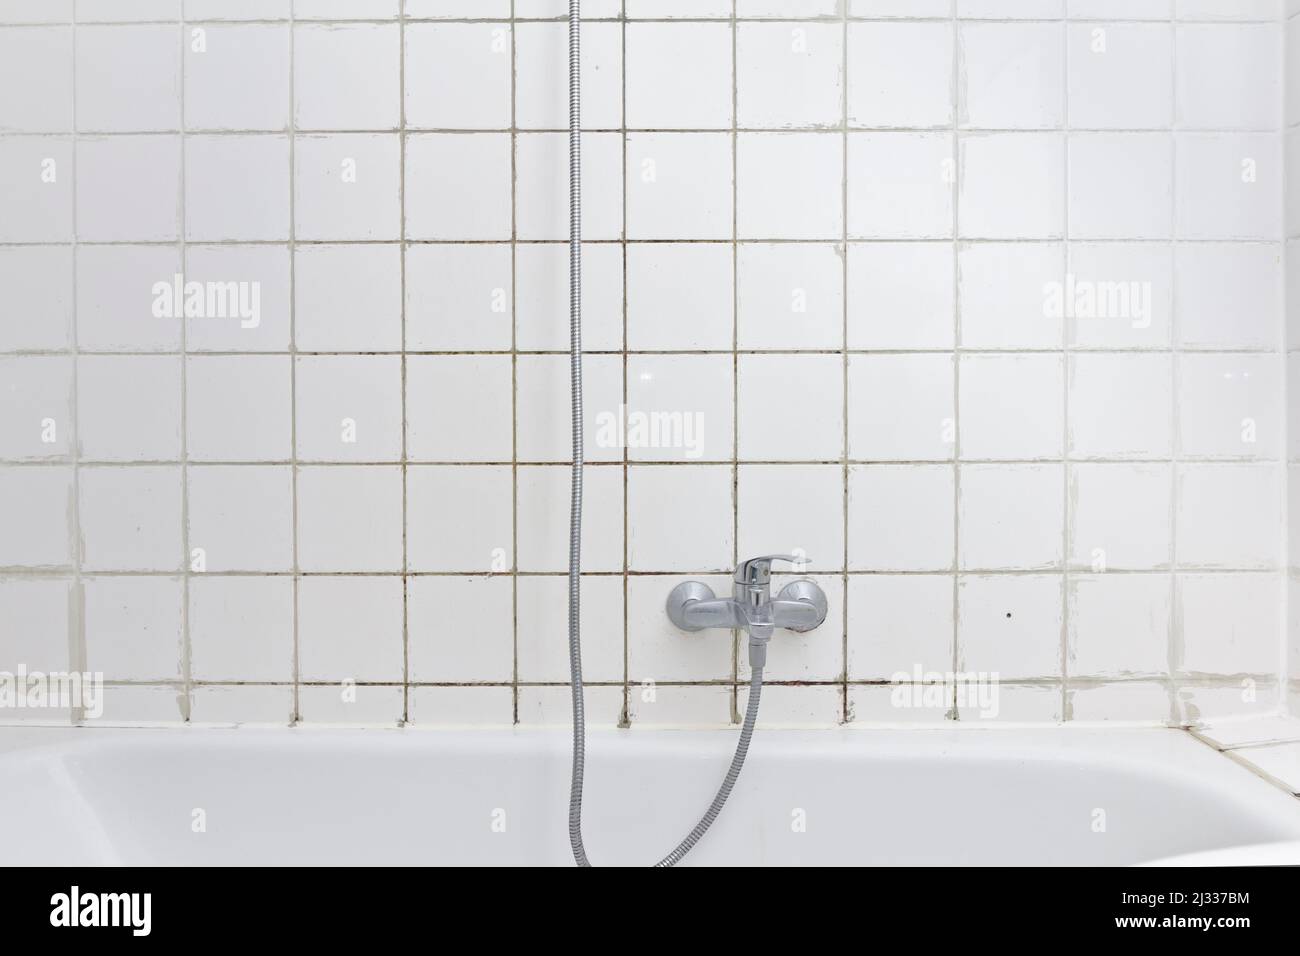 Rental damage concept: grimy shower in bath tub with black mold growing on calcifications on the tile grouting in a neglected old bathroom. Stock Photo